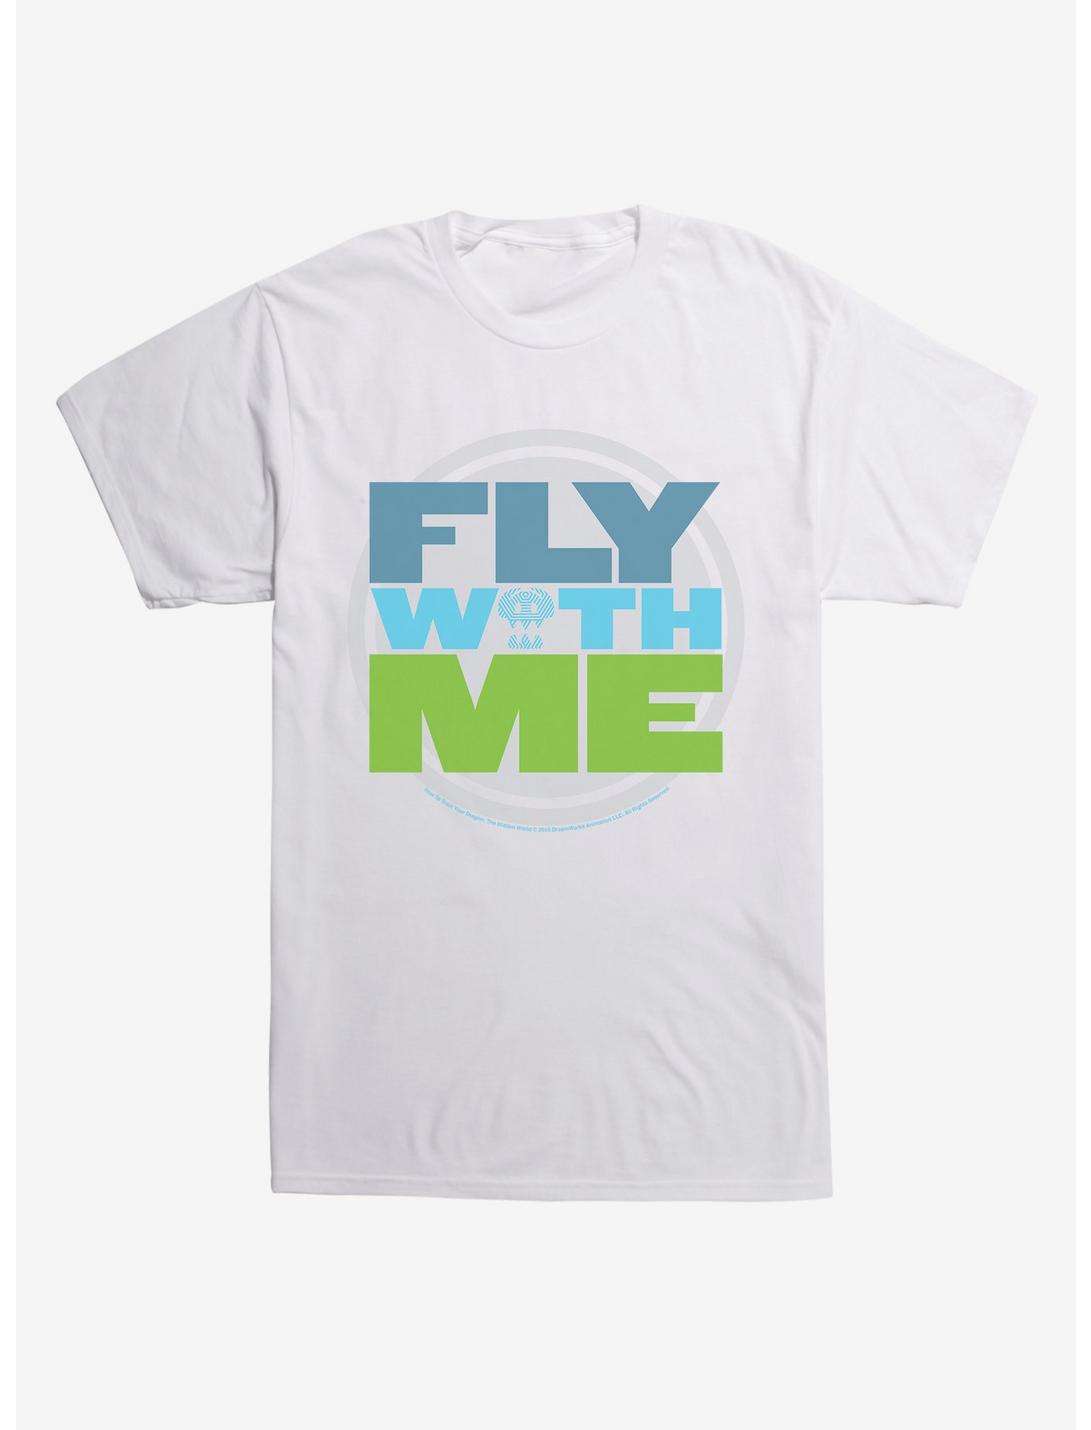 How To Train Your Dragon Fly With Me T-Shirt, WHITE, hi-res